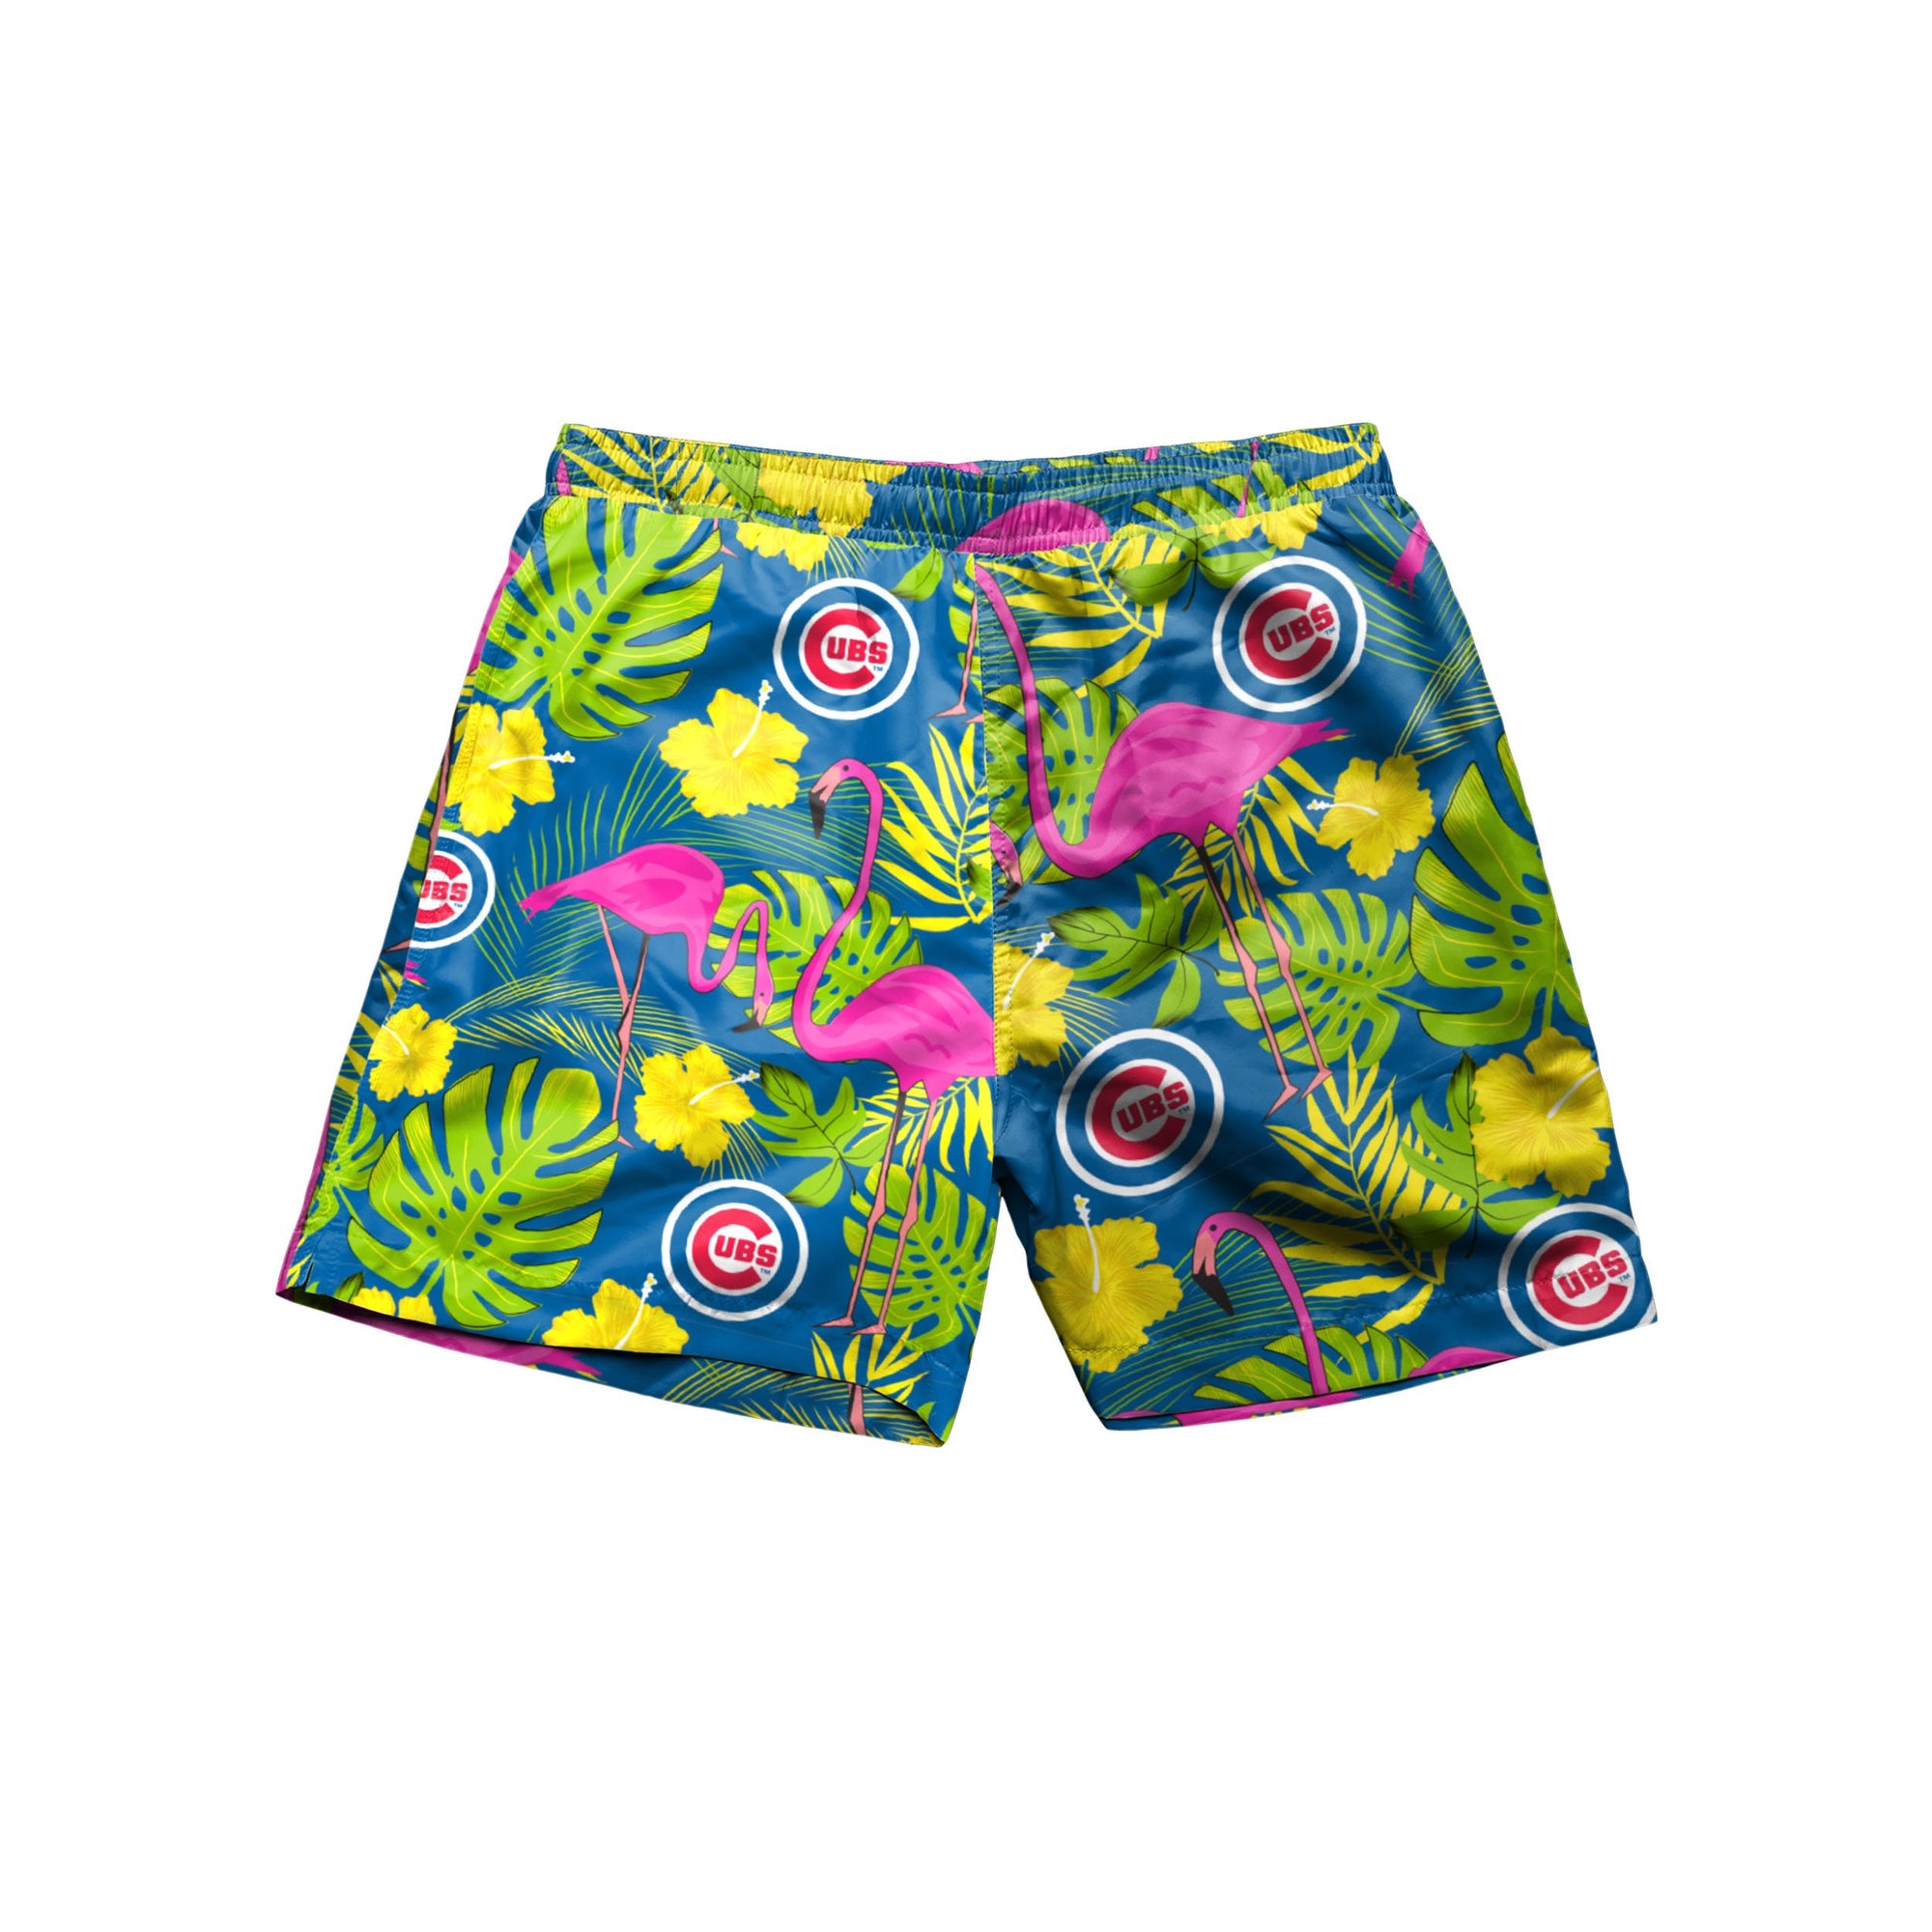 Chicago Cubs MLB Mens Highlights Swimming Trunks